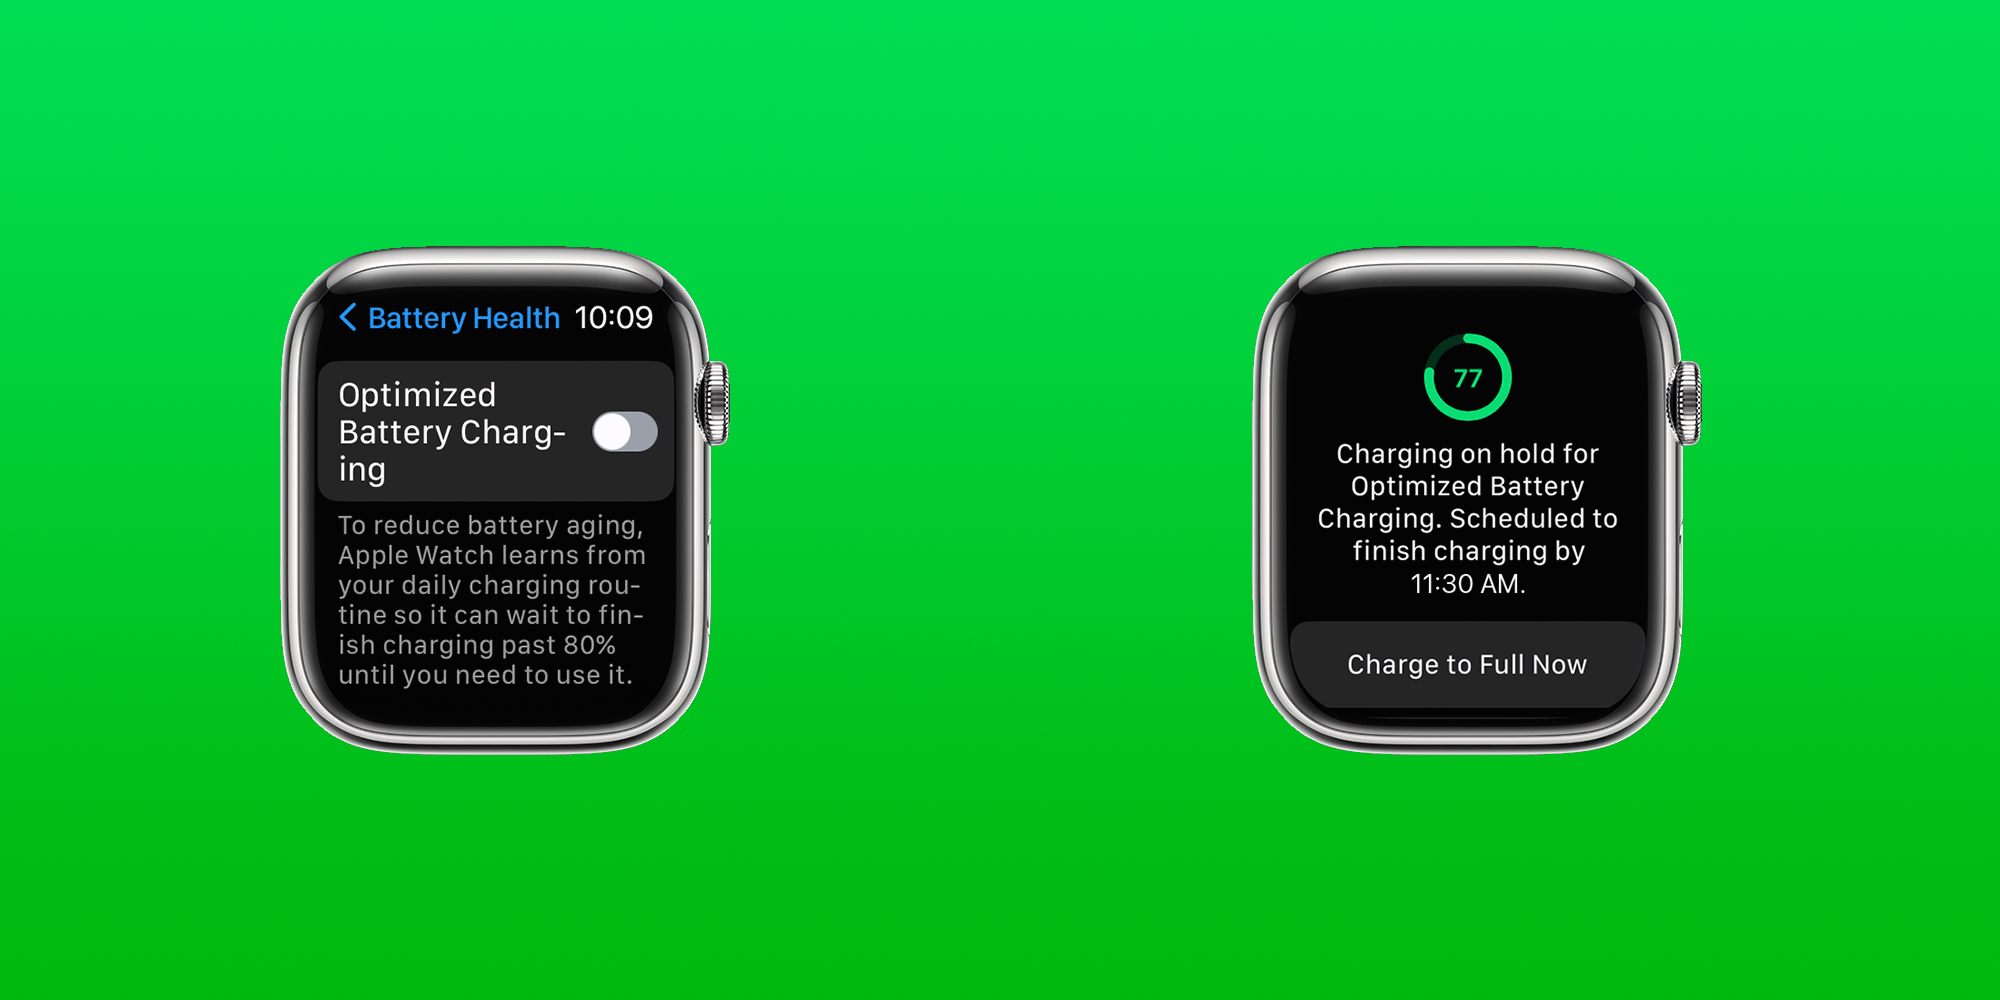 Optimized Battery Charging settings on Apple Watch.